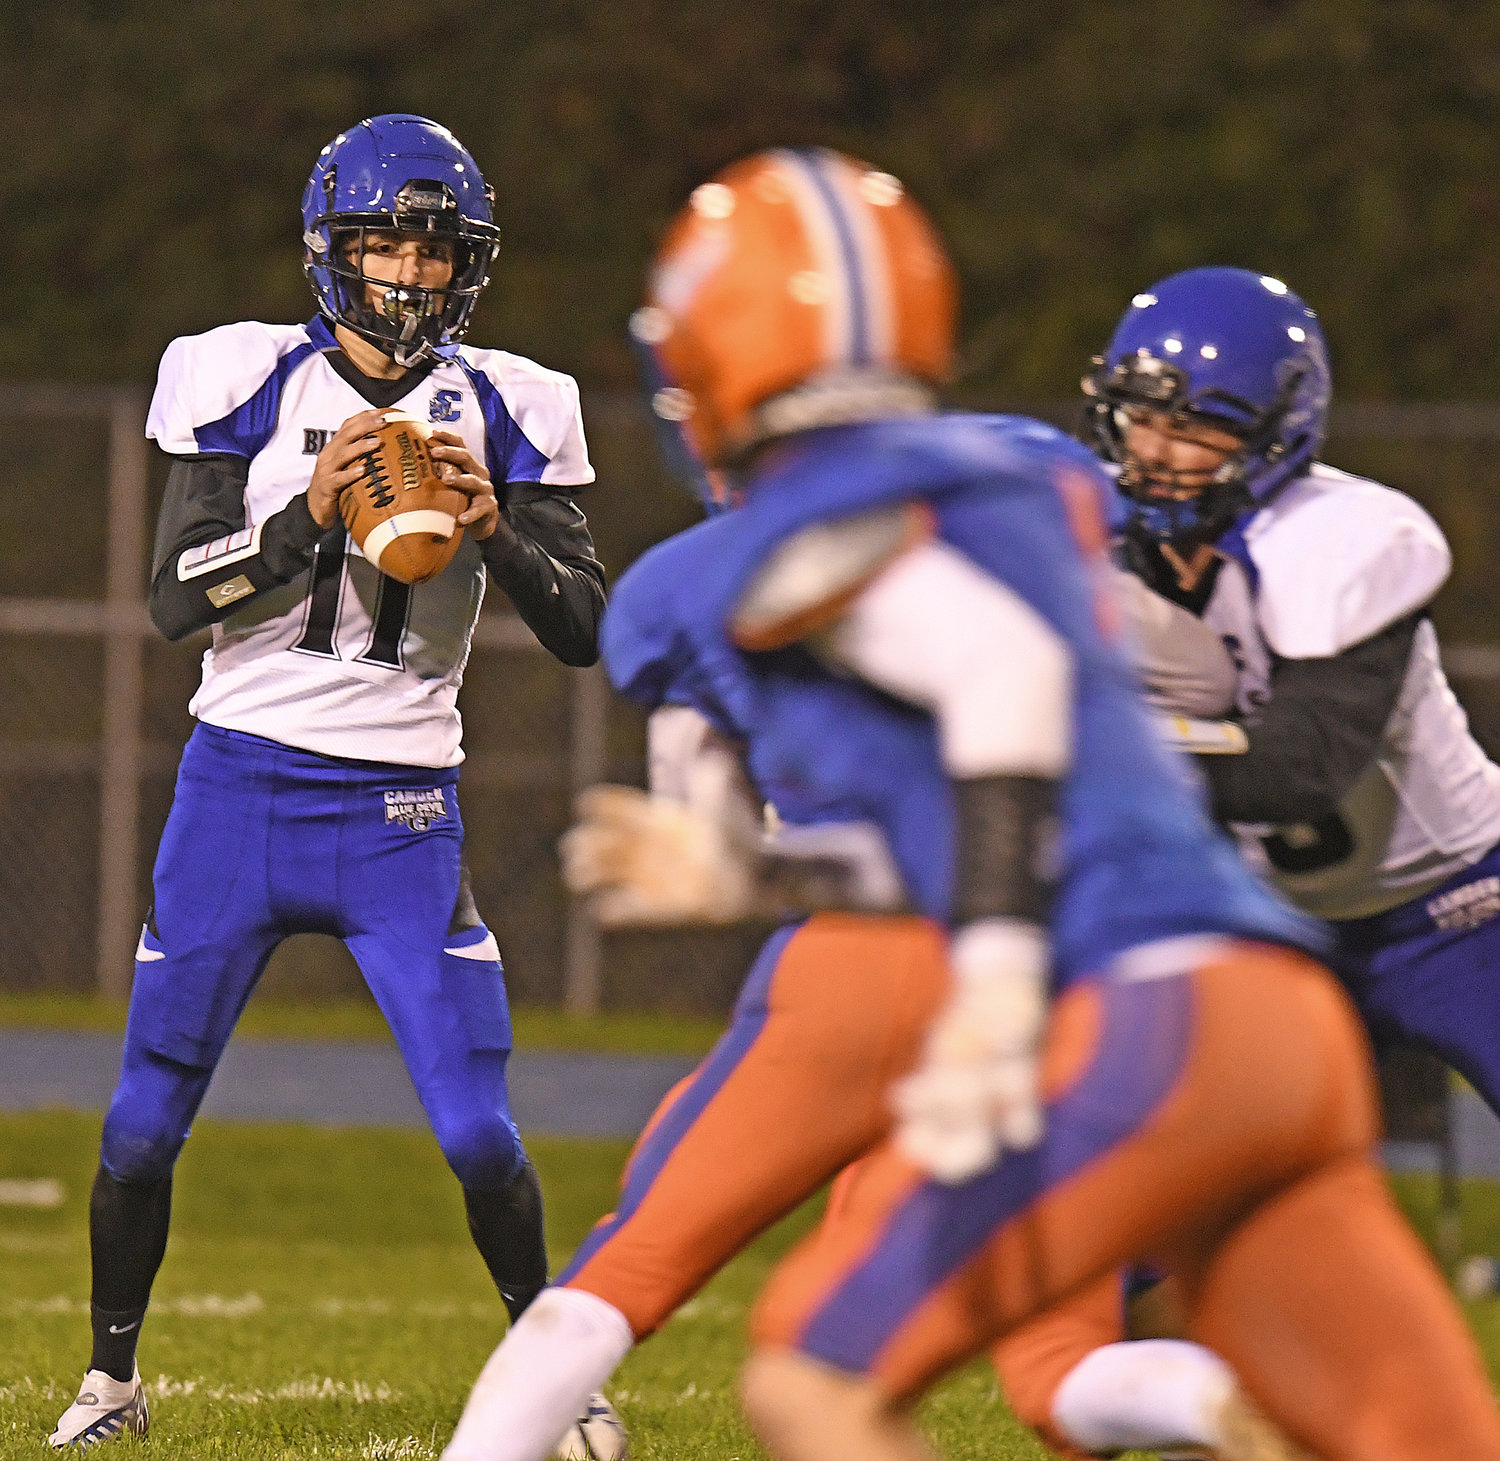 Camden QB Connor Dean looks for a receiver in the first quarter Friday night in Oneida. Dean finished with four total touchdowns in a 39-20 win.